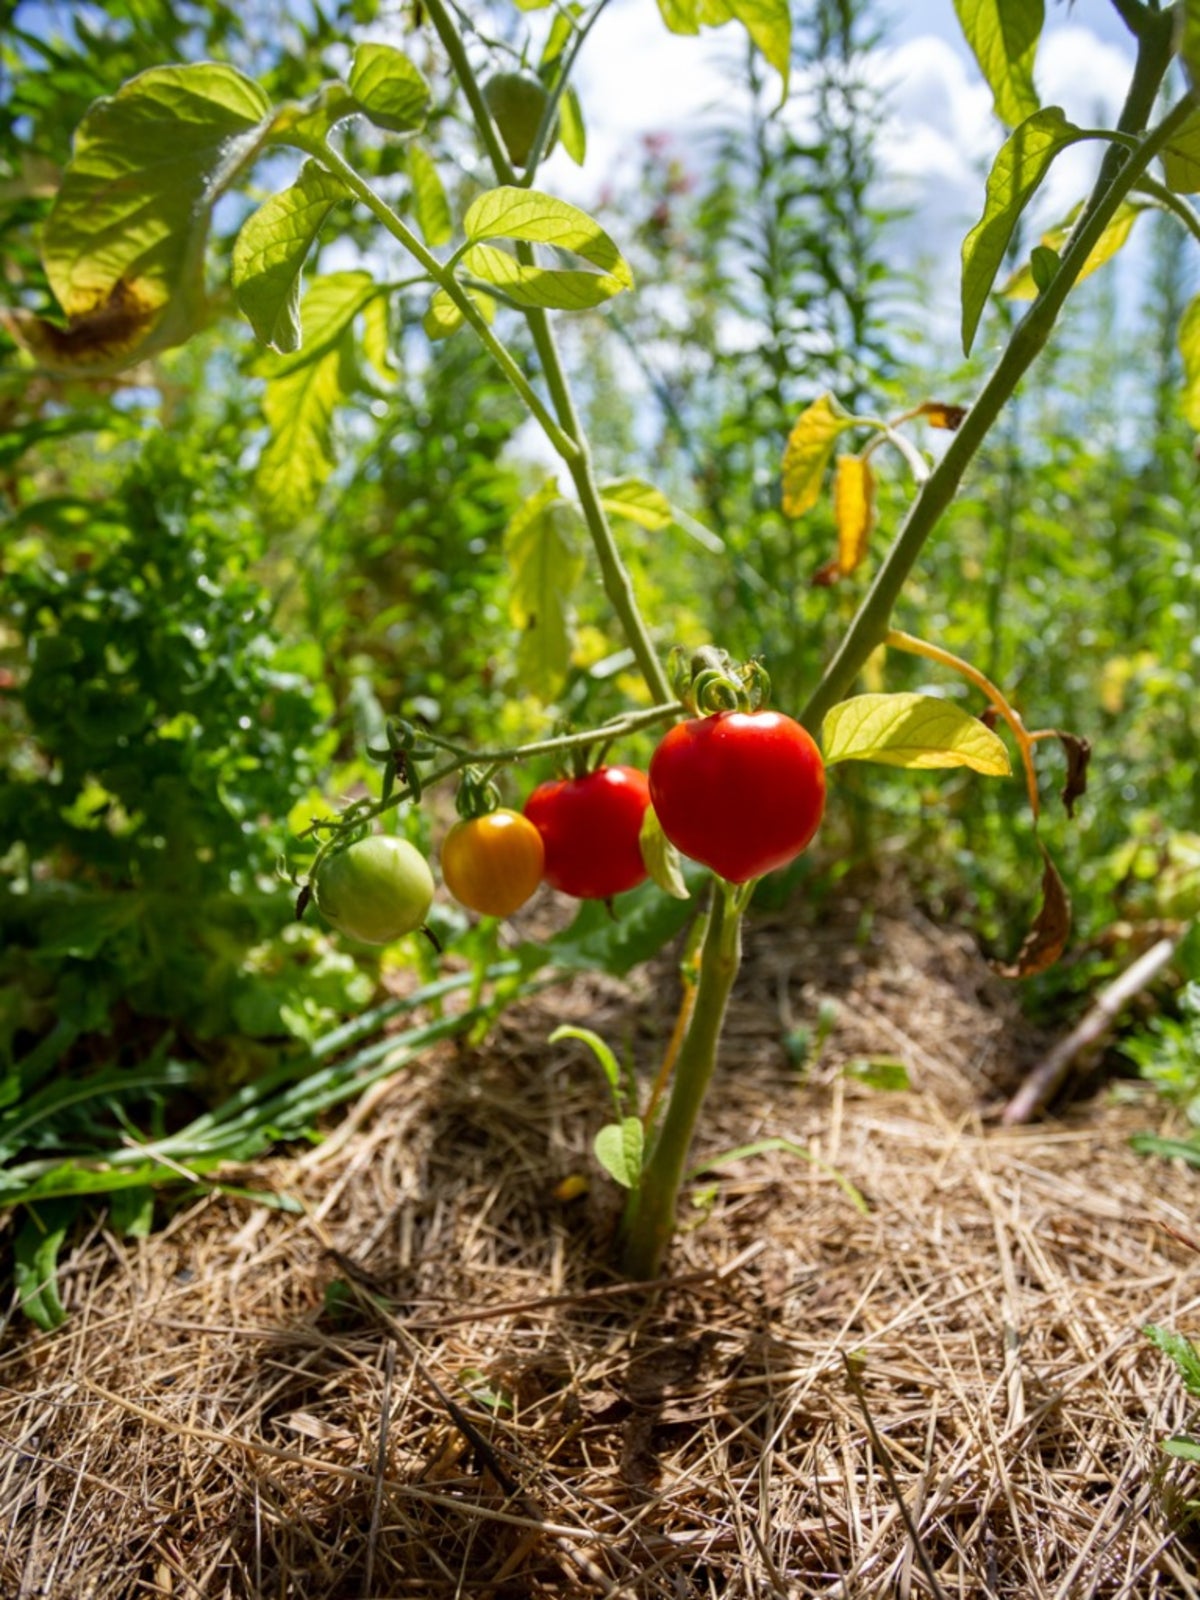 About Tomato Mulch - When And How To Mulch Tomatoes